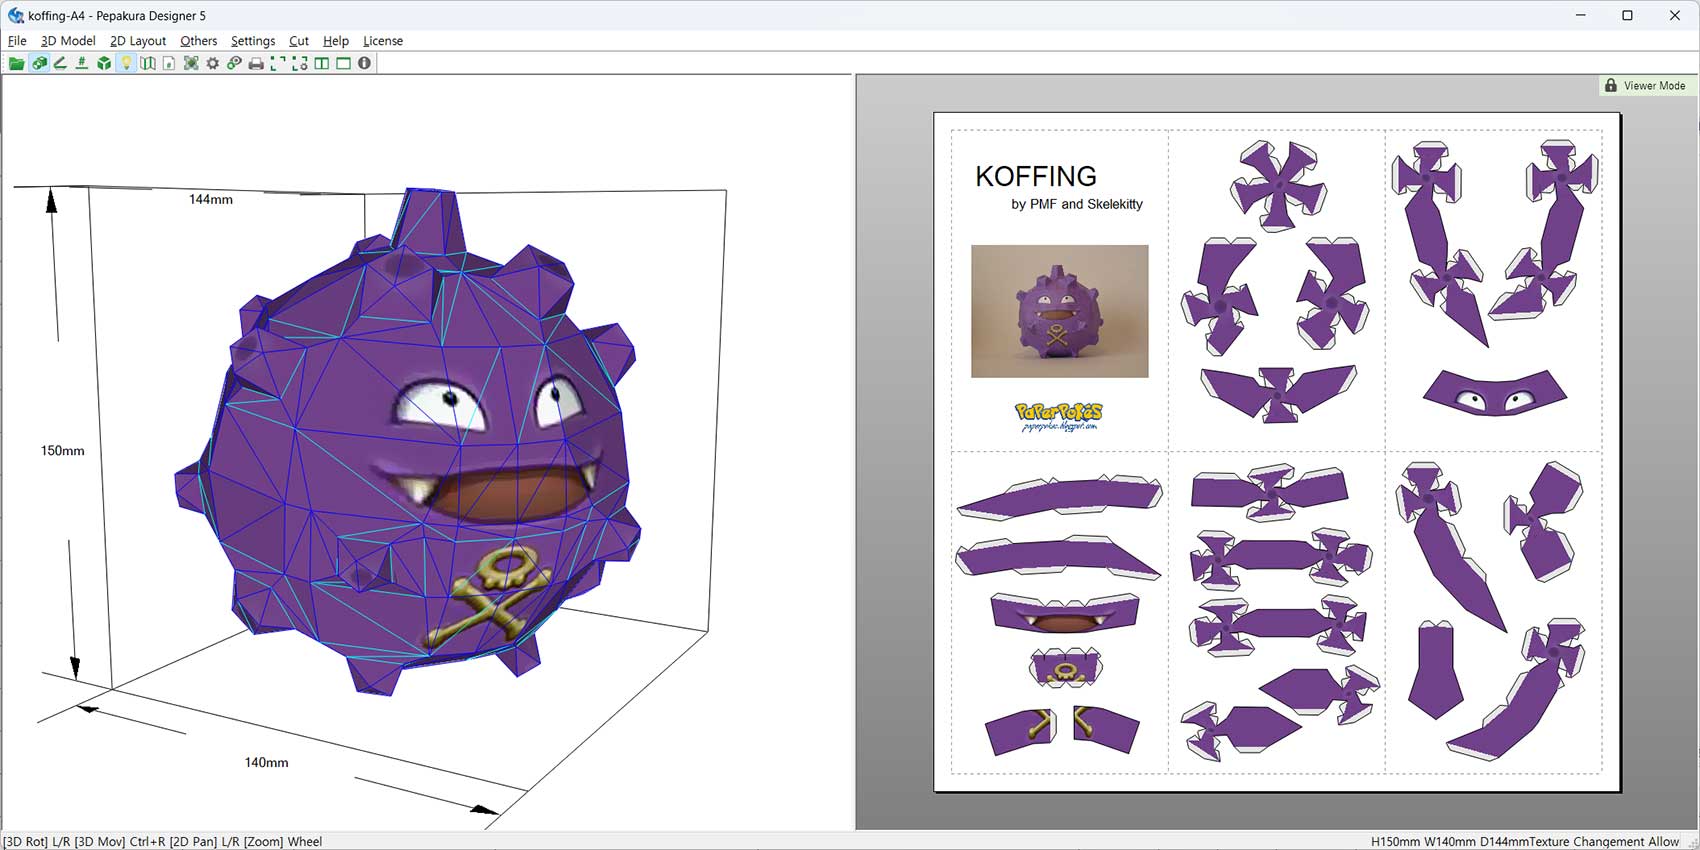 Koffing (또가스)